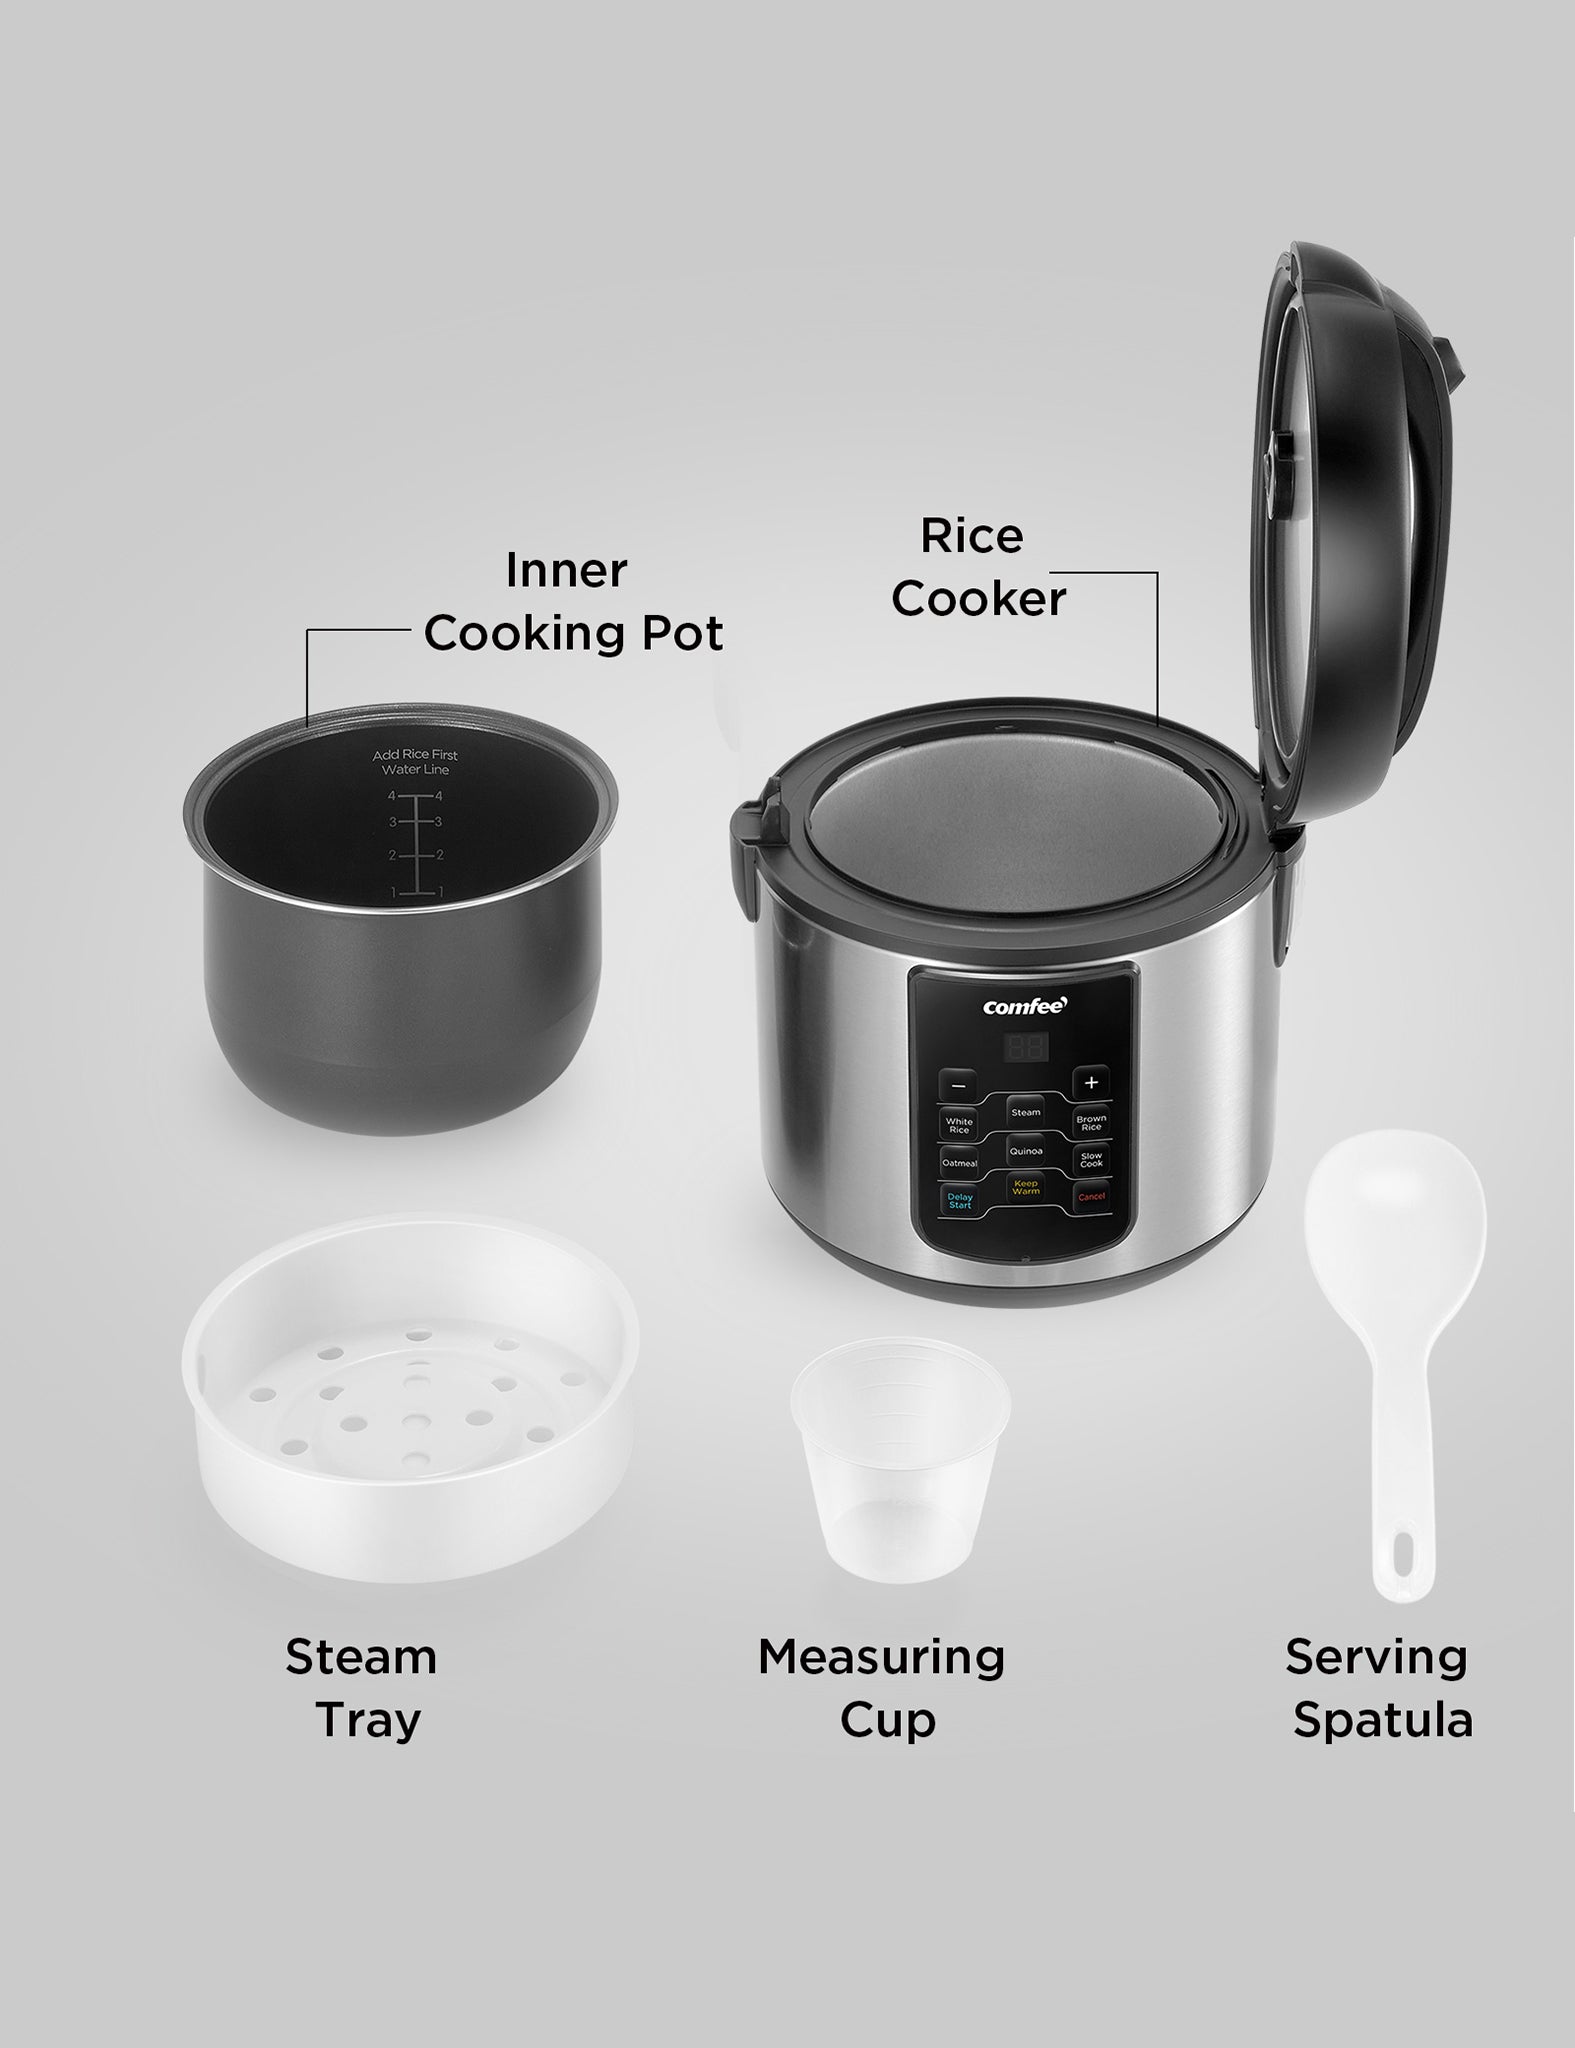 COMFEE' Rice Cooker Slow Cooker Steamer Stewpot Saute All in